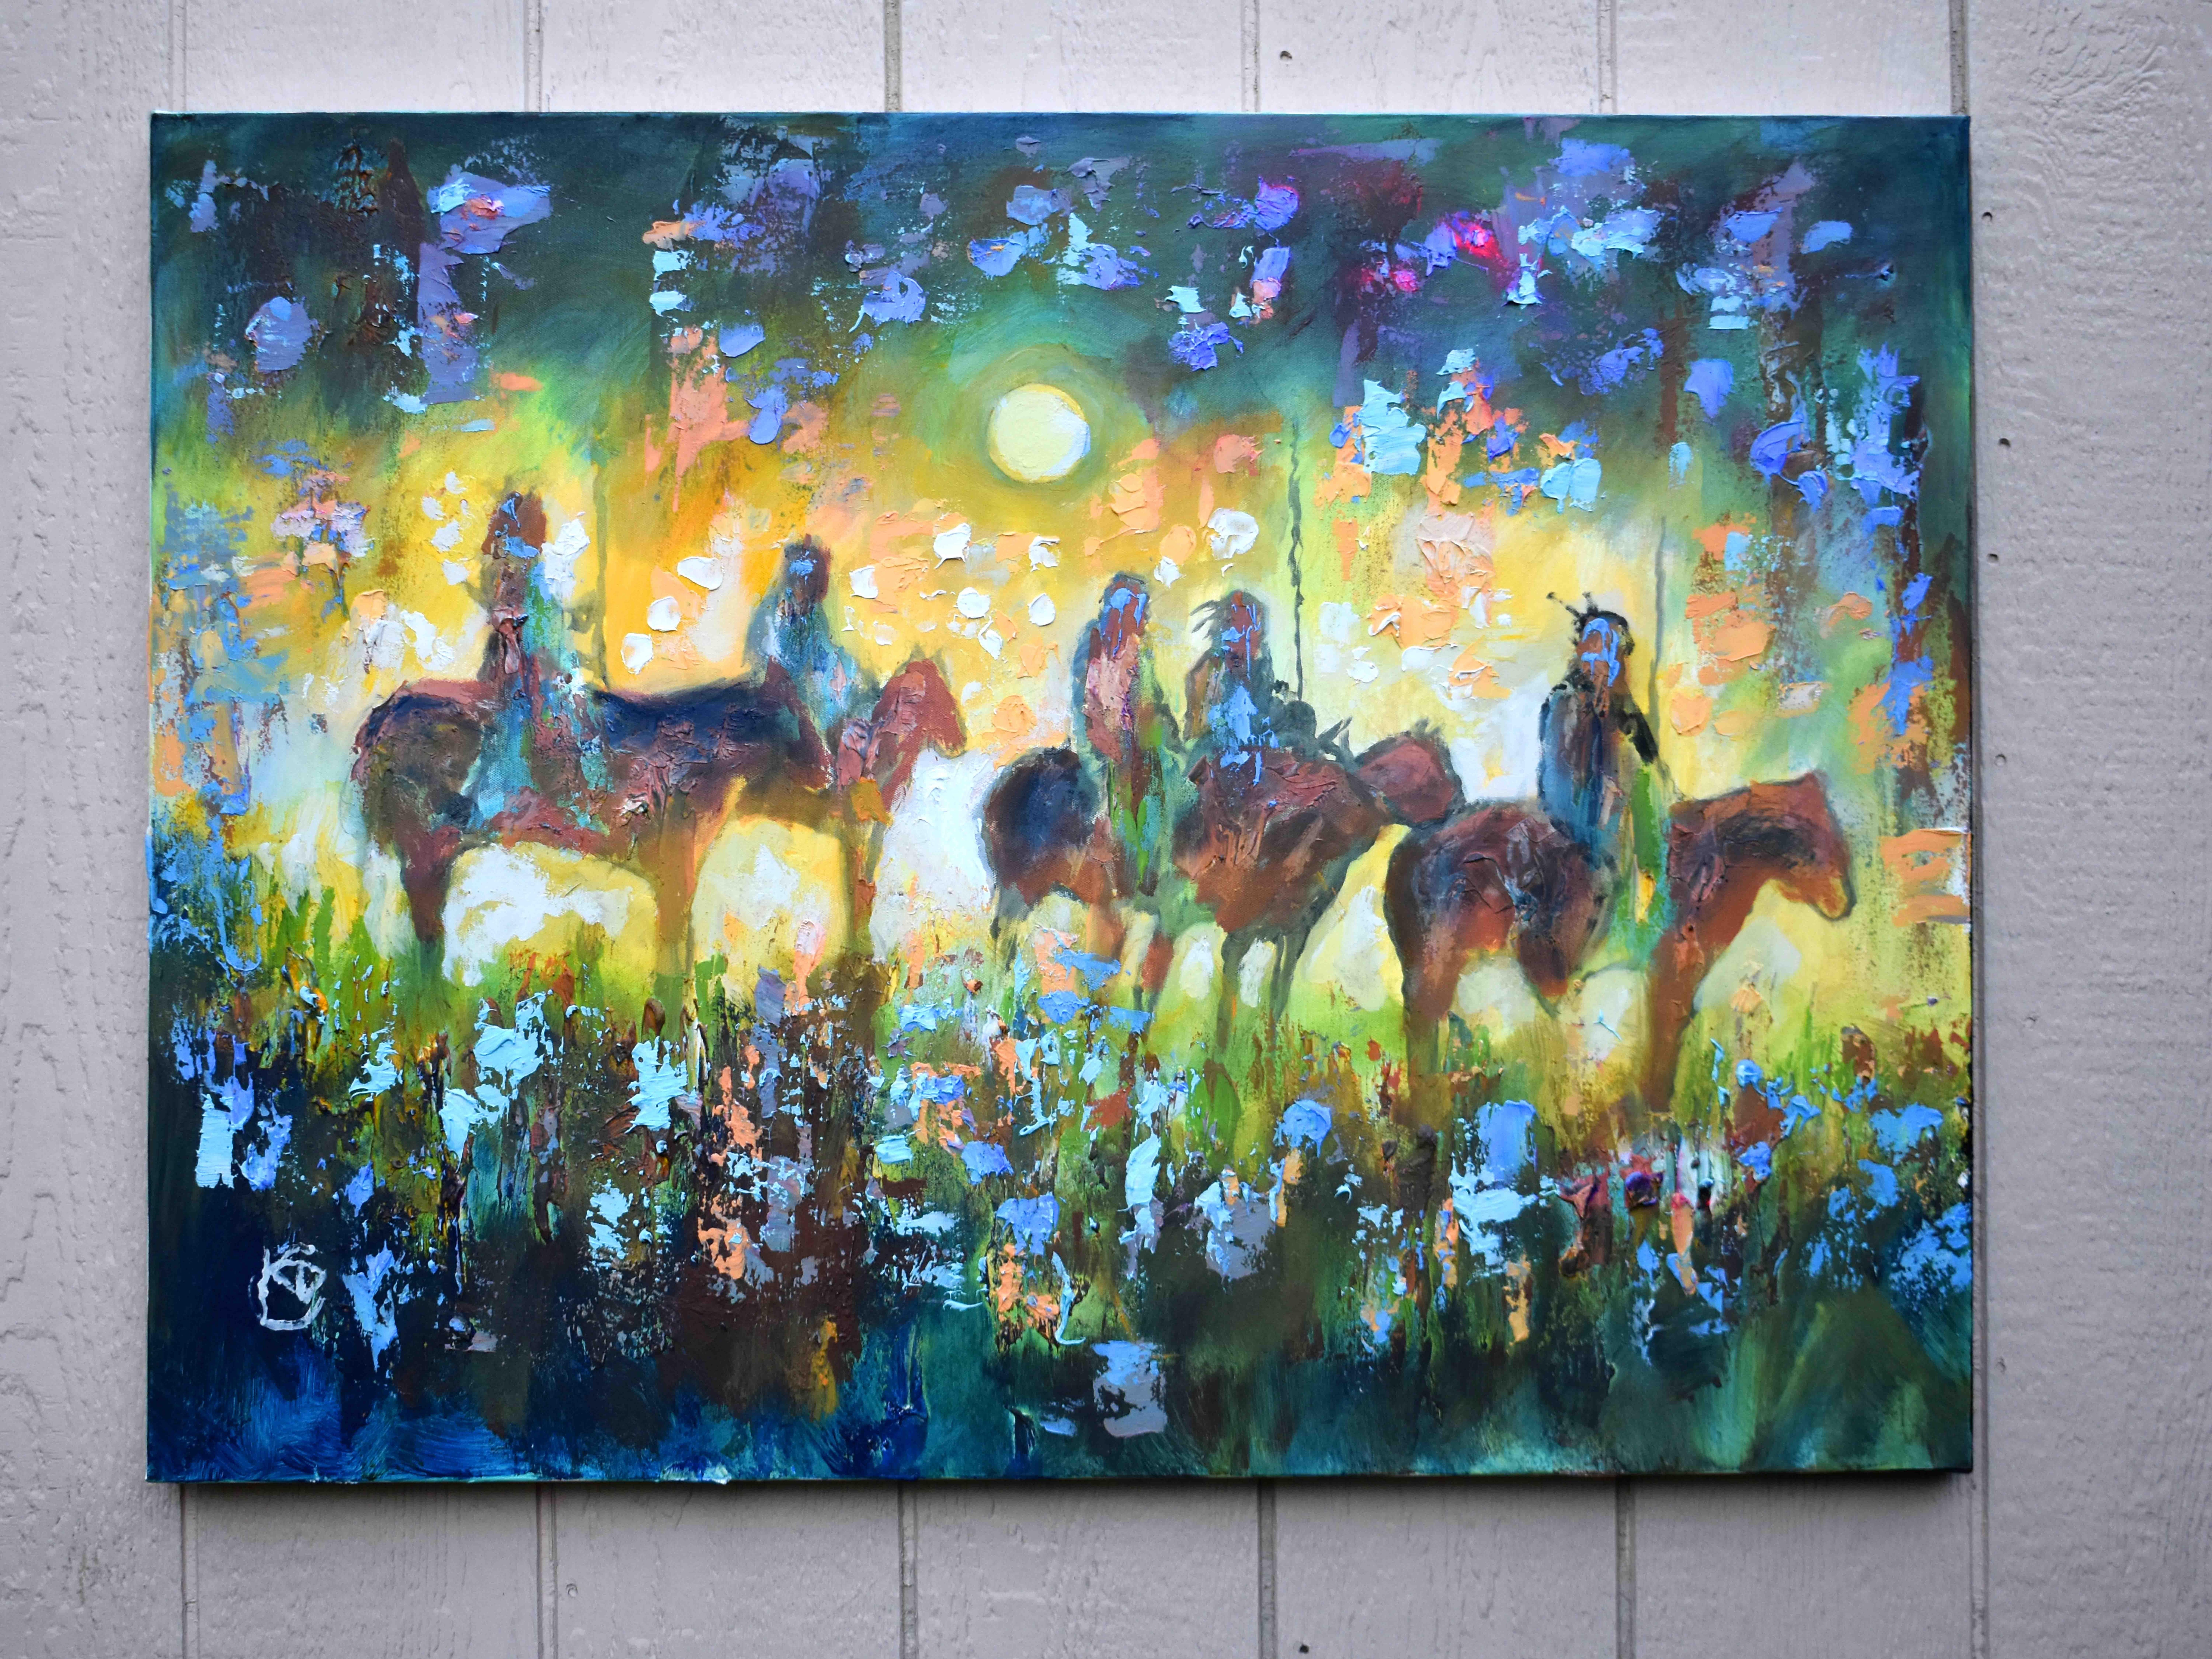 <p>Artist Comments<br>Artist Kip Decker presents a vibrant portrait of five Native Americans on horseback. They collectively look out and watch for the unforeseen, surrounded by colorful specks of flowers in a field and stars in the sky. The moon